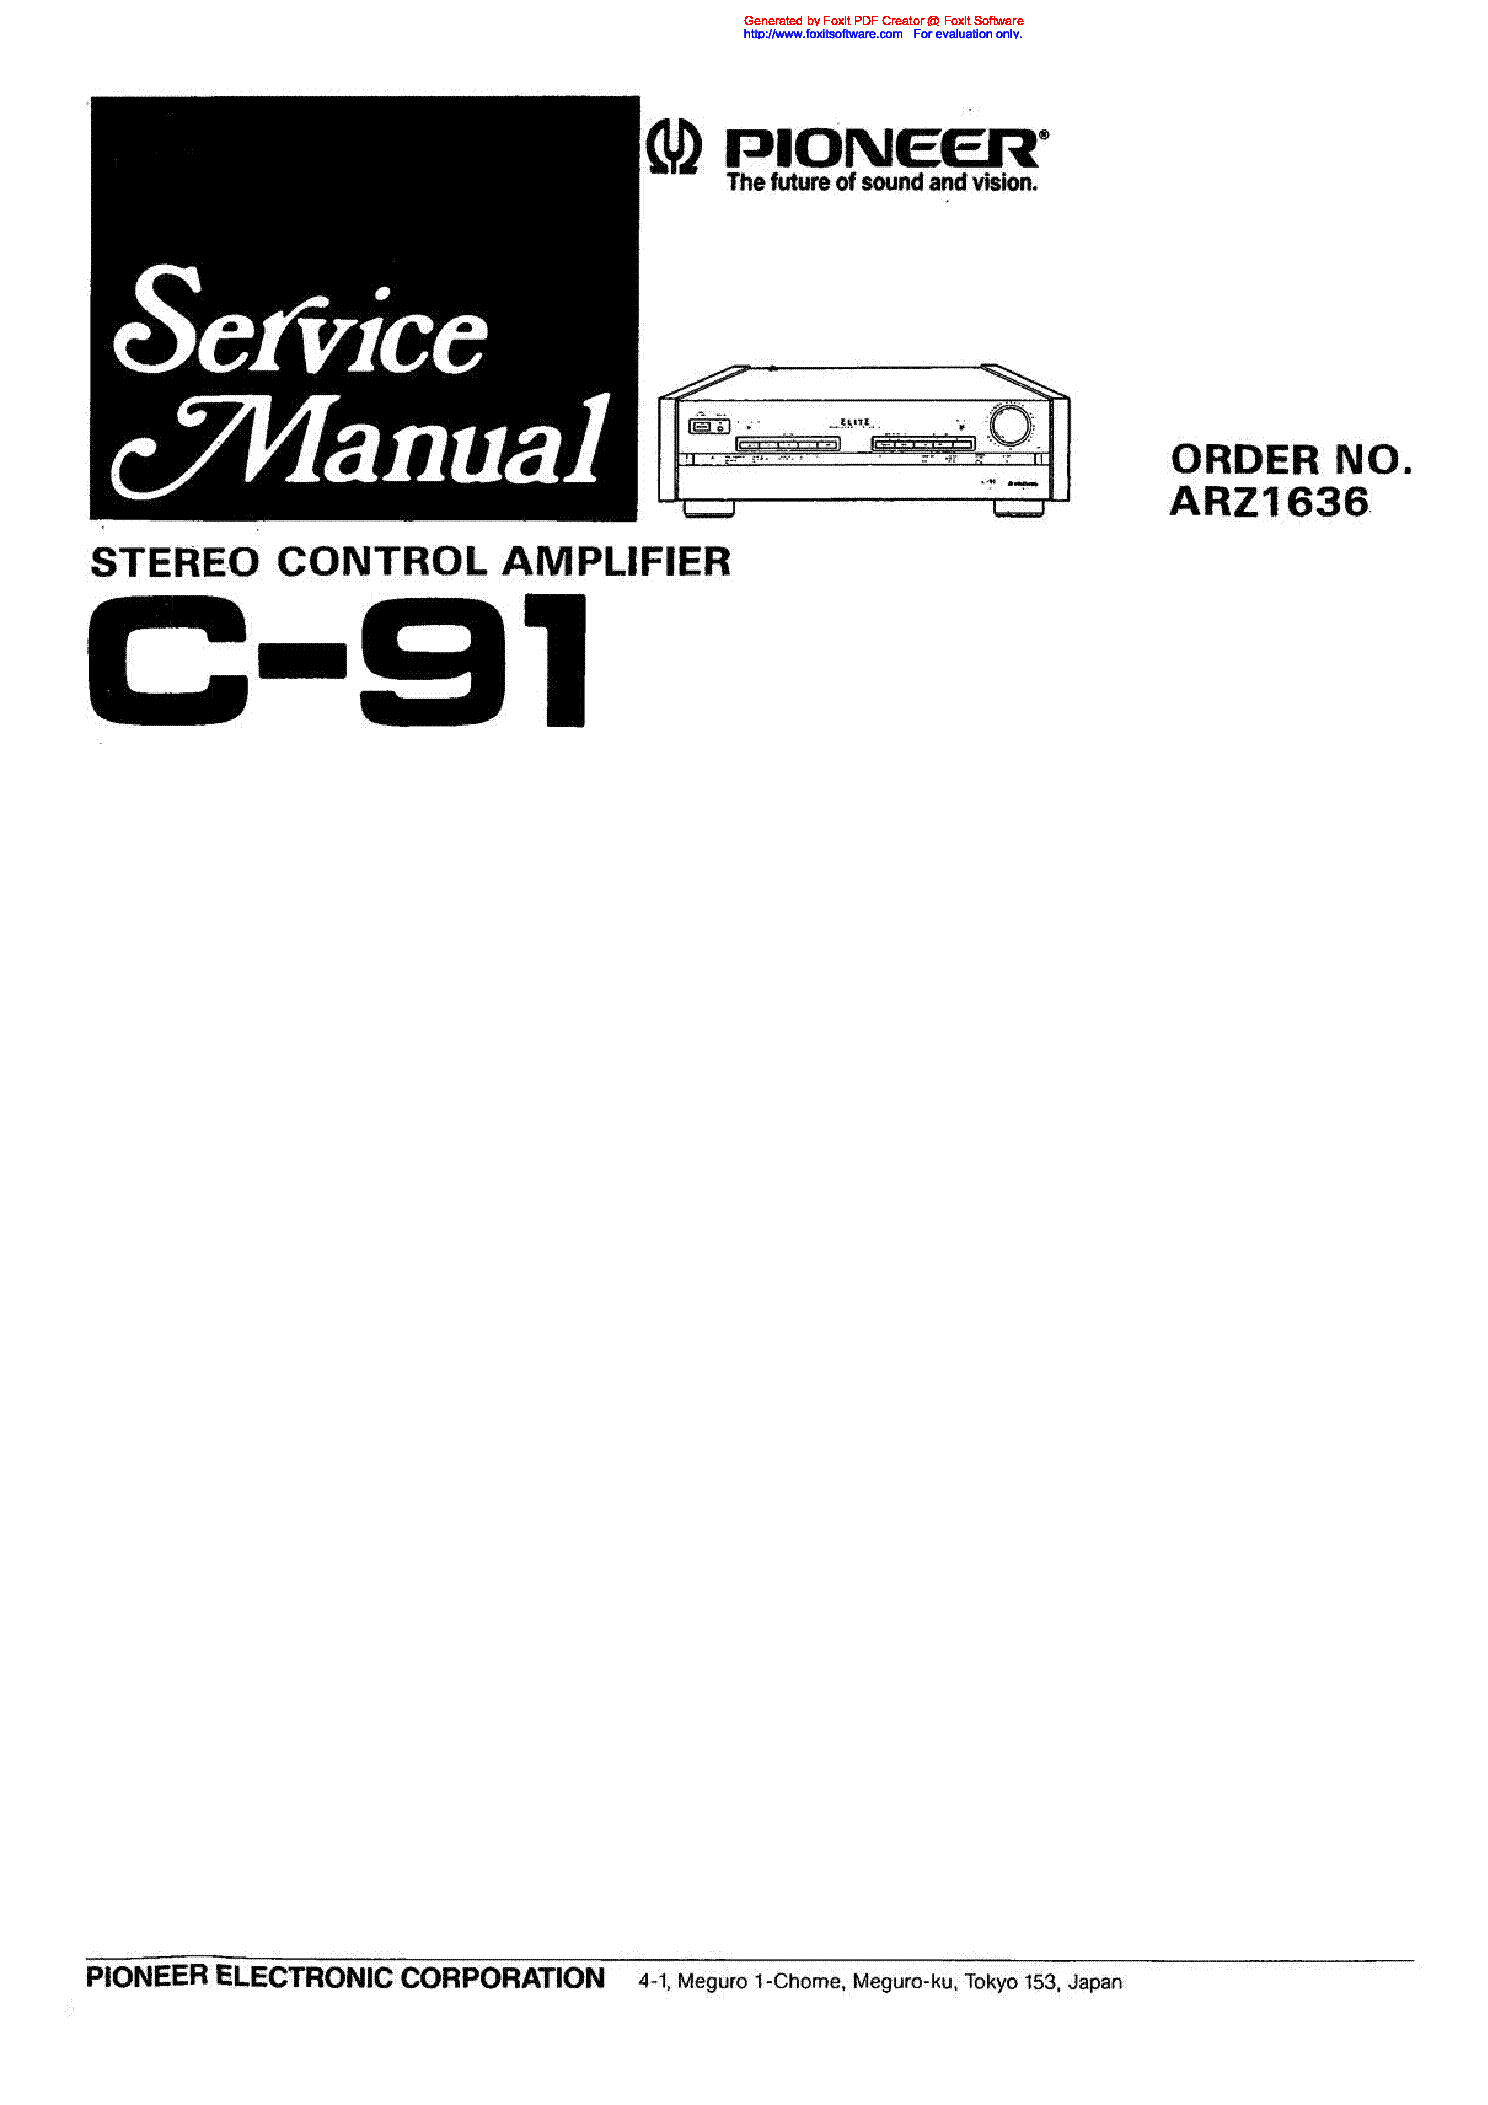 PIONEER C-91 SM service manual (1st page)